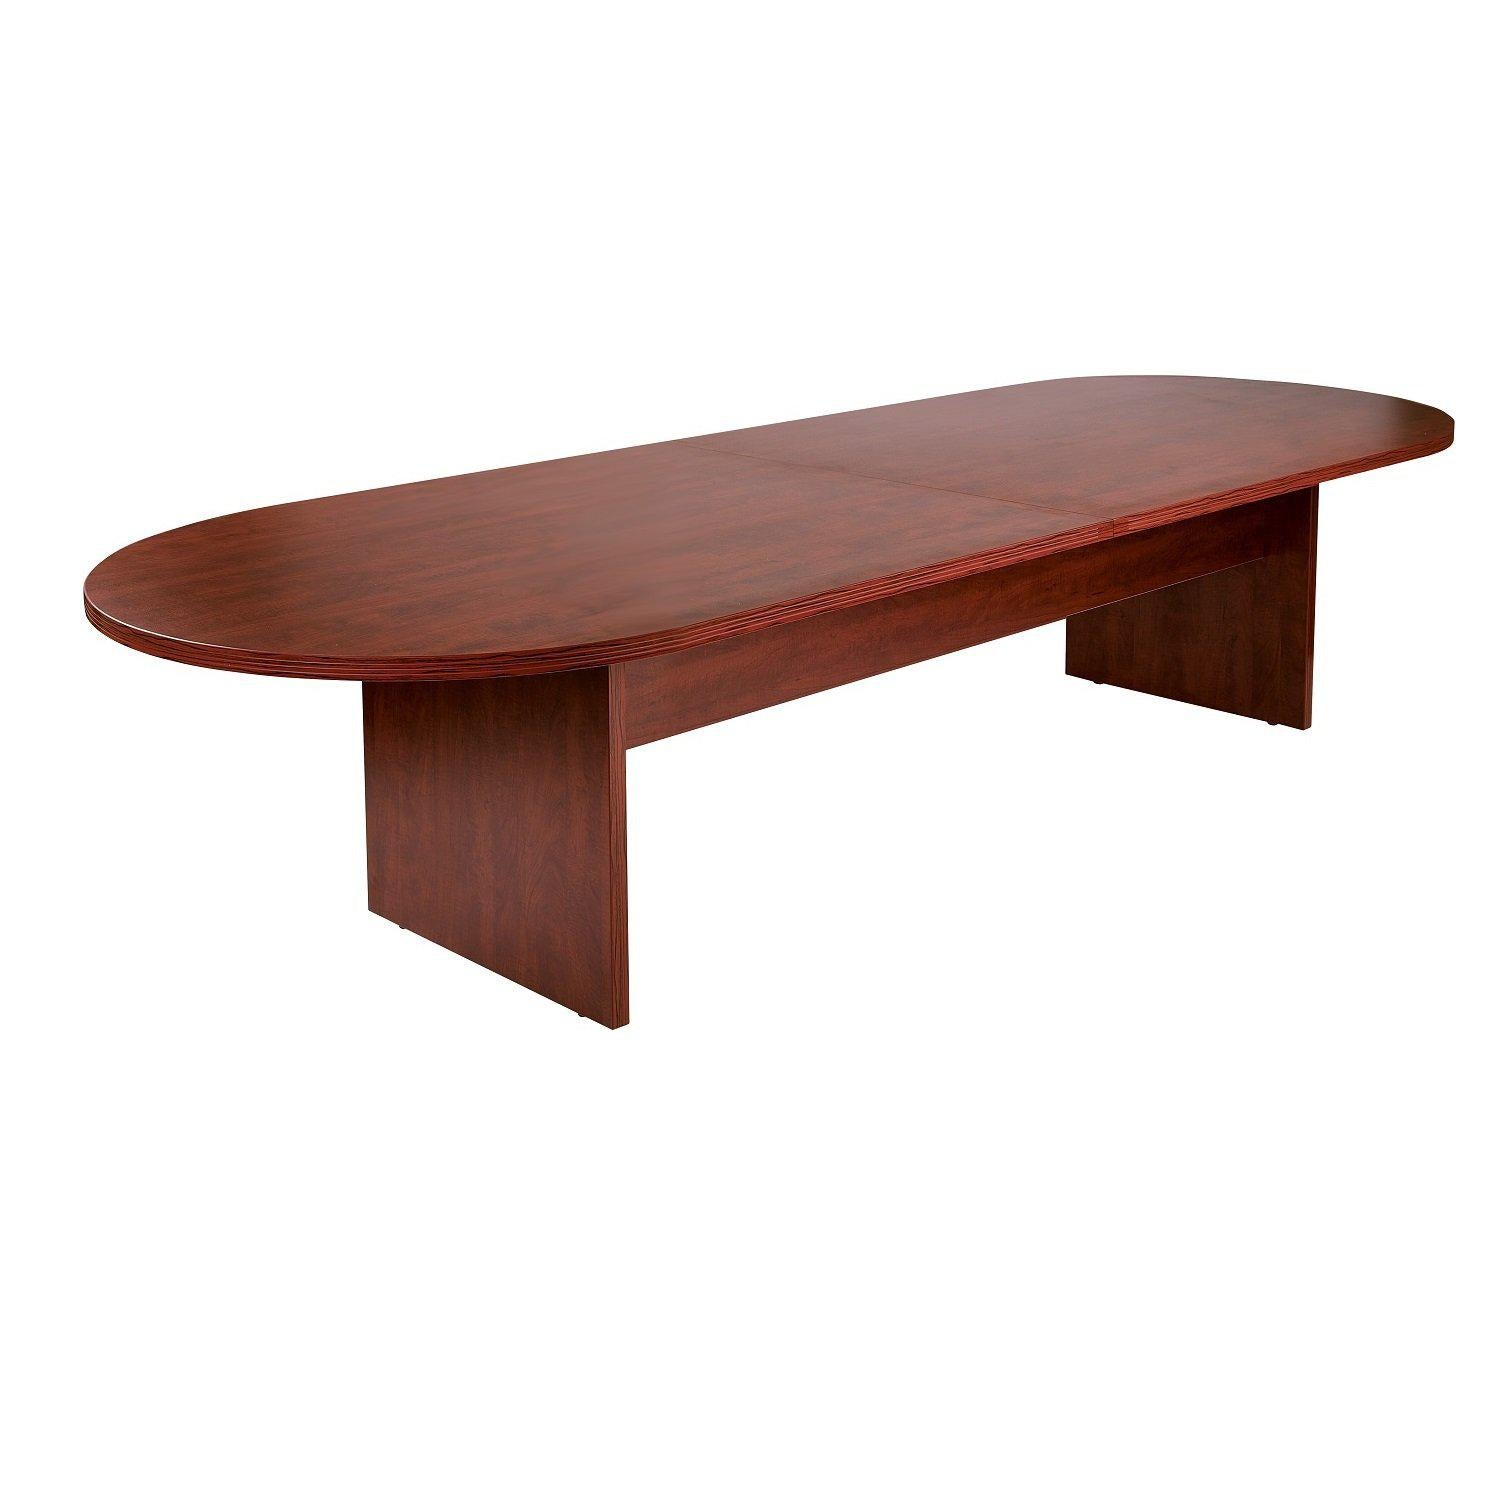 Napa Racetrack Conference Table 120" x 48" x 29" H